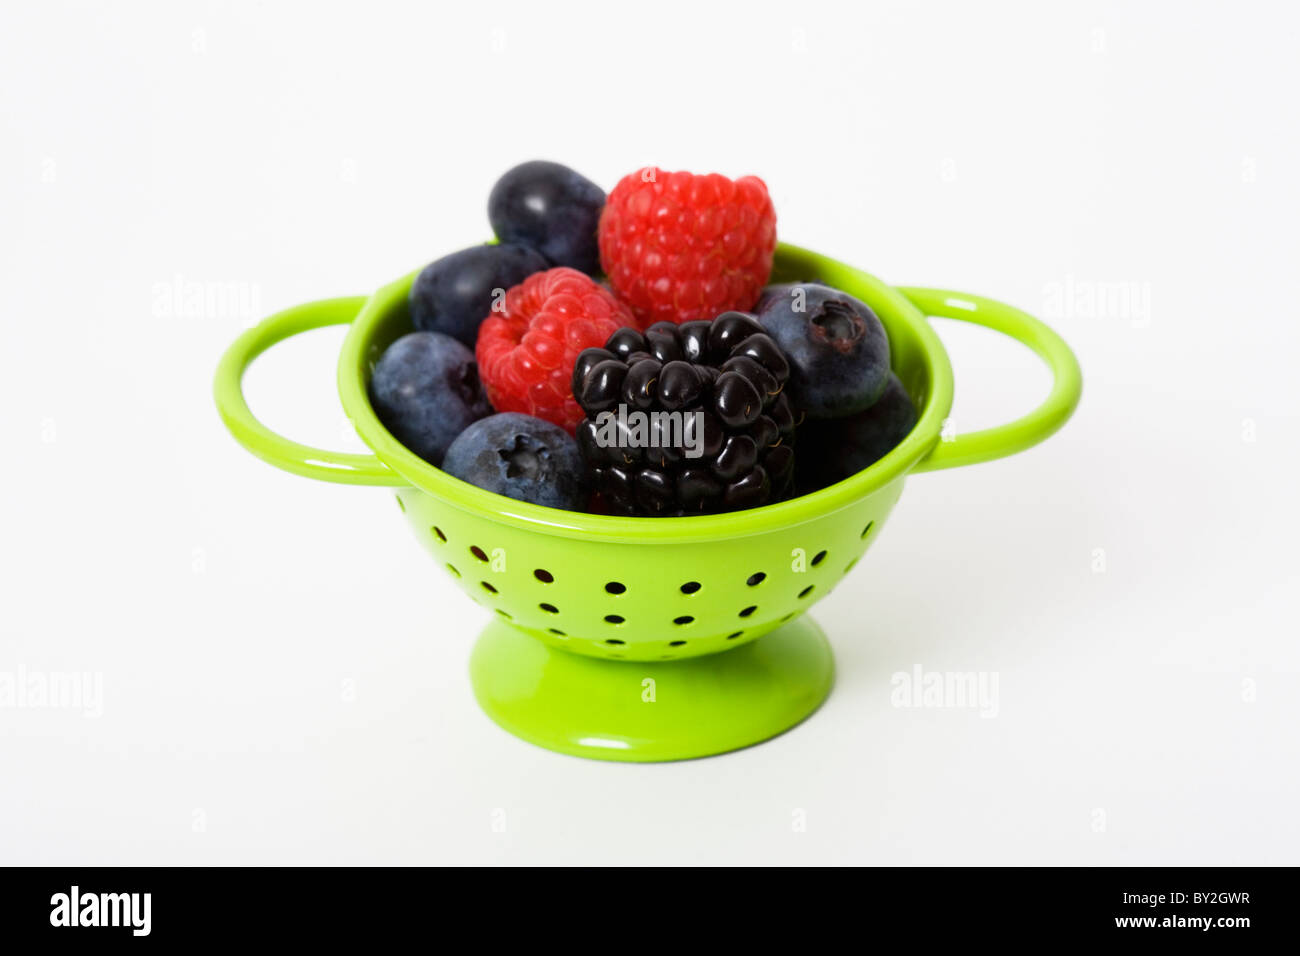 A small colander filled with fresh berries Stock Photo